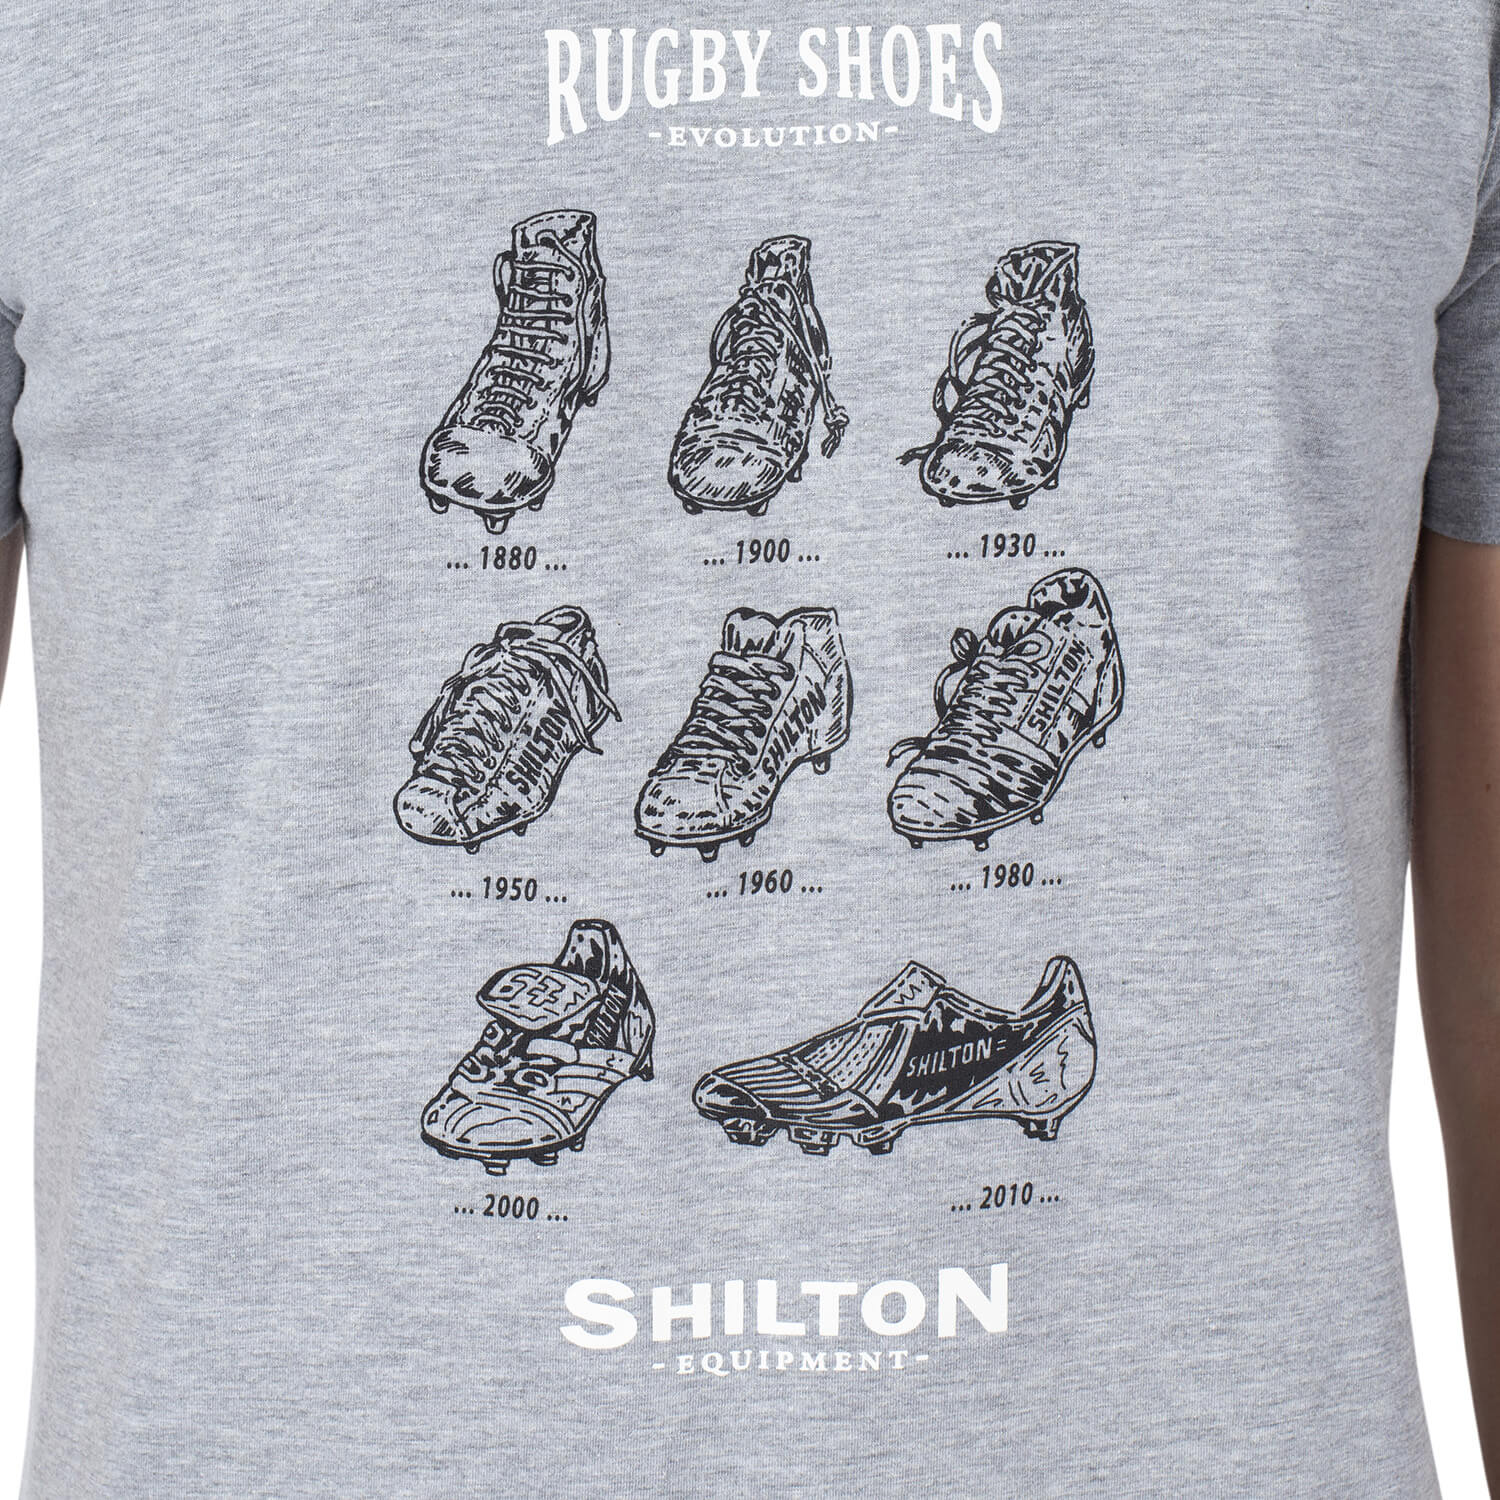 T-shirt rugby shoes evolution